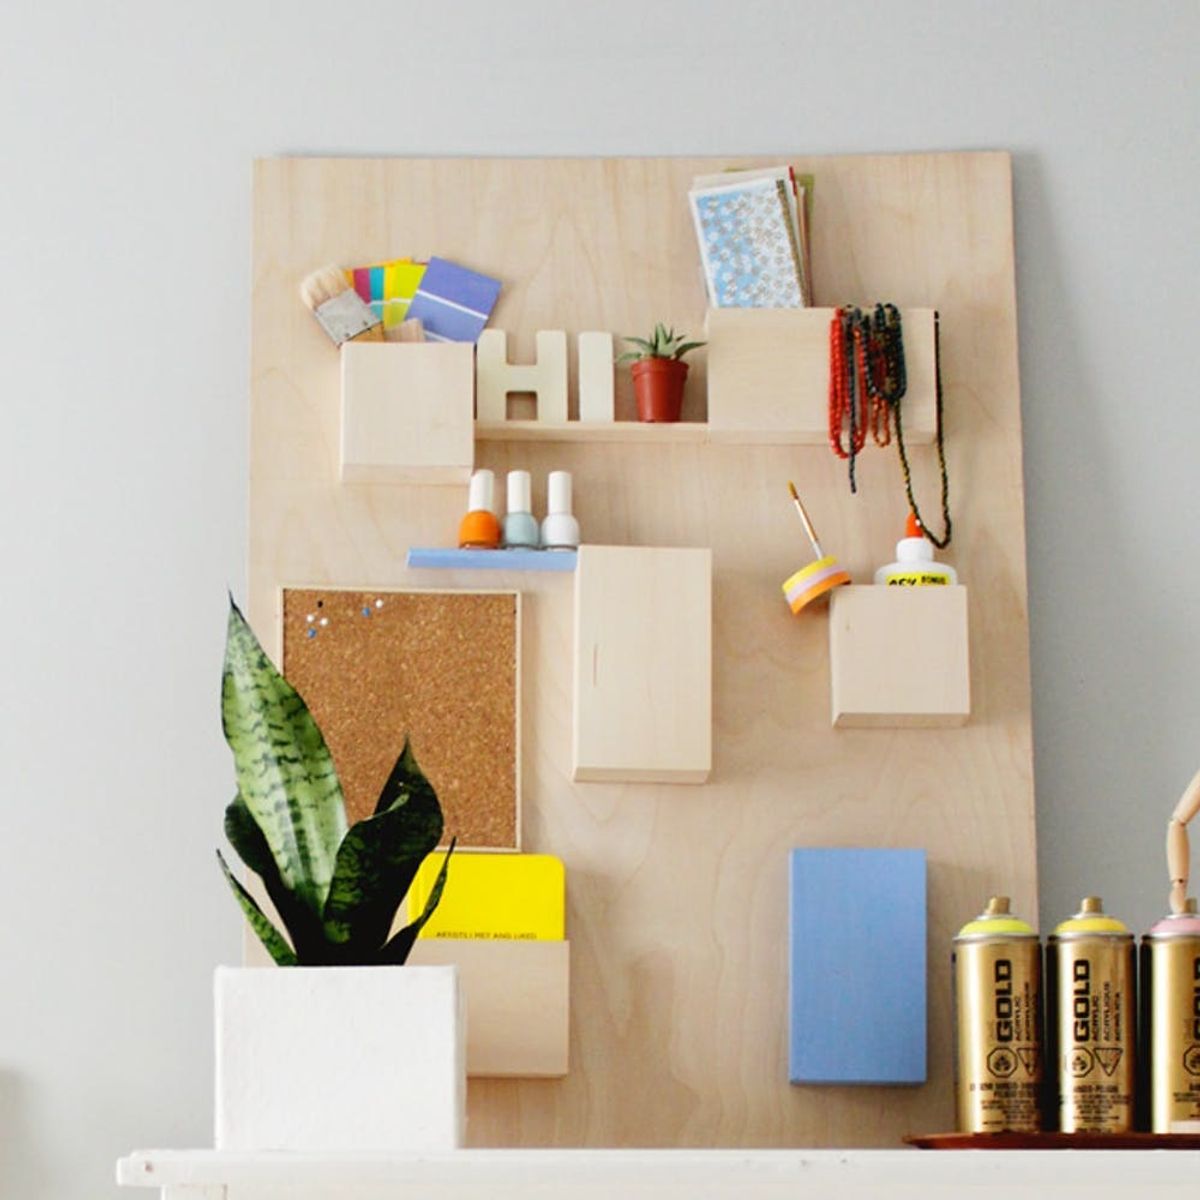 DIY This $328 Anthropologie Wall Organizer for Less Than $50